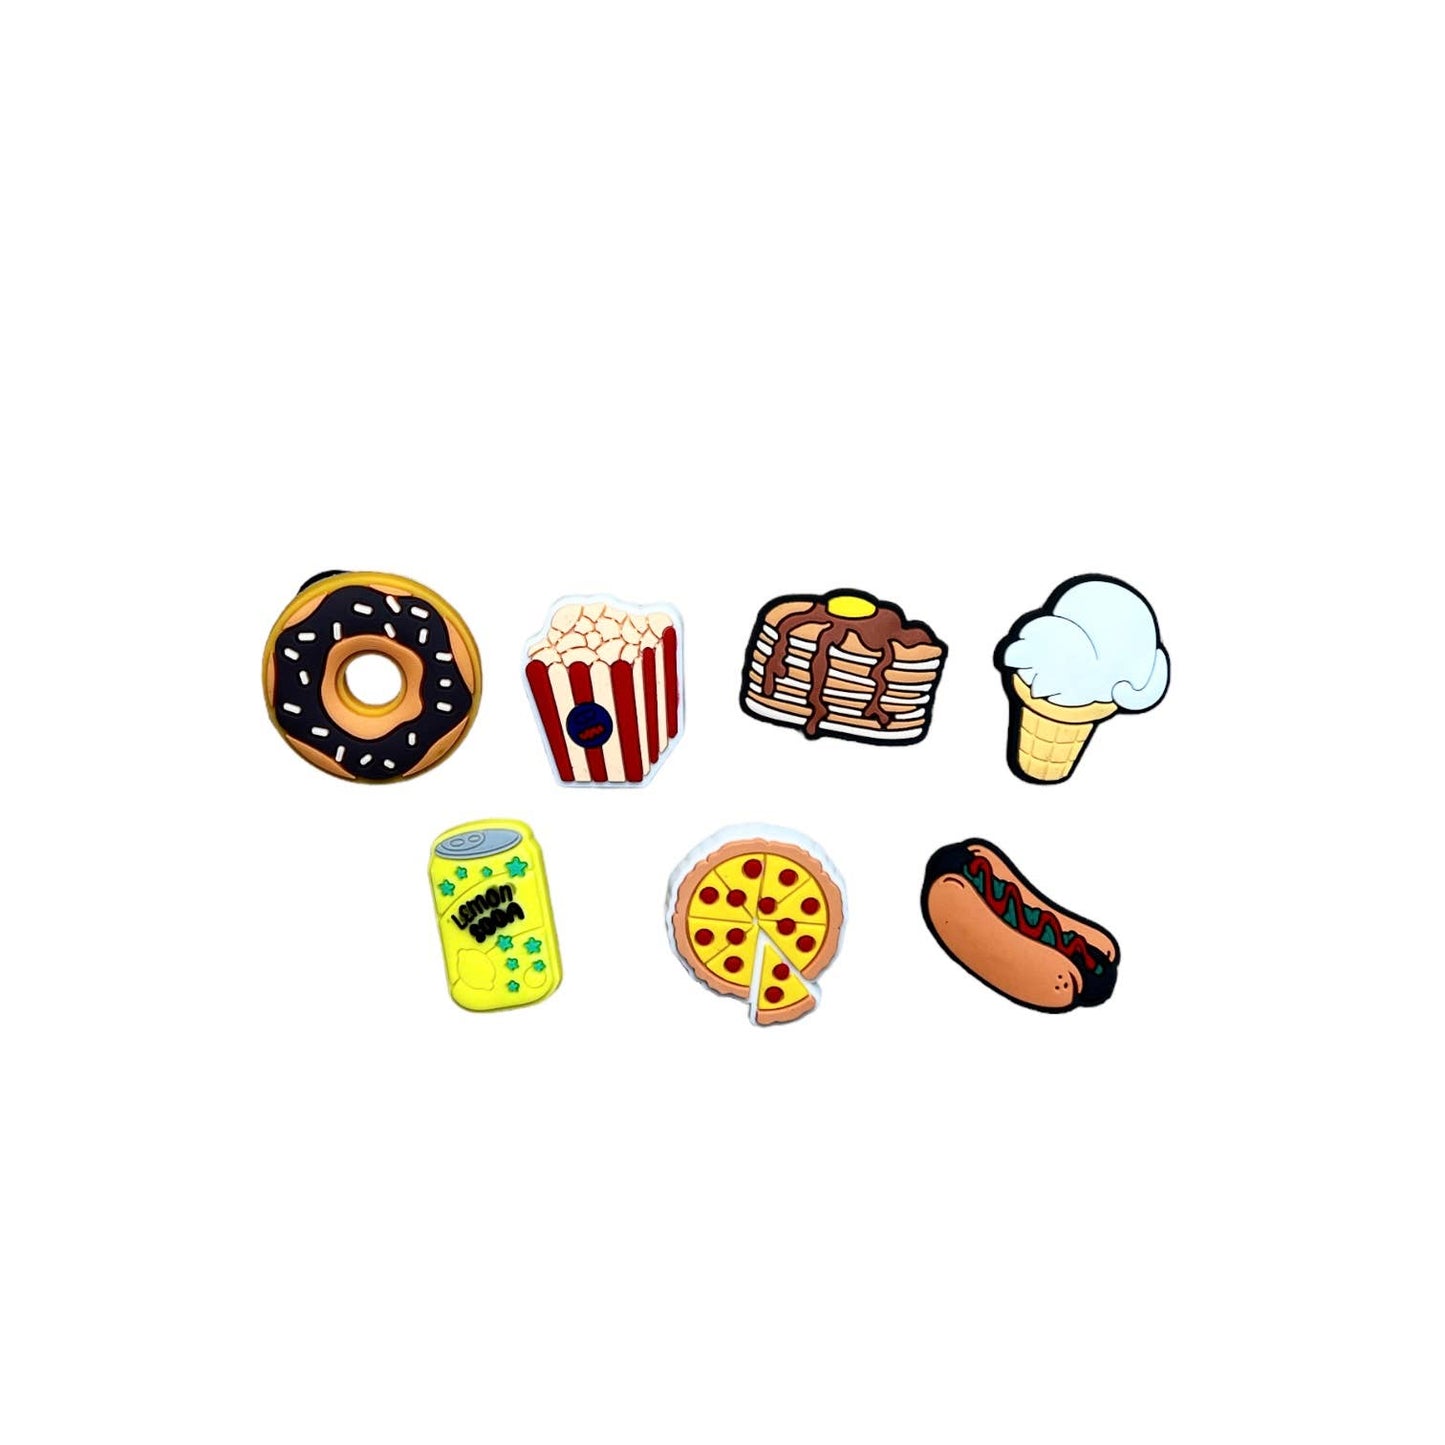 The Snack Attack Charm Set